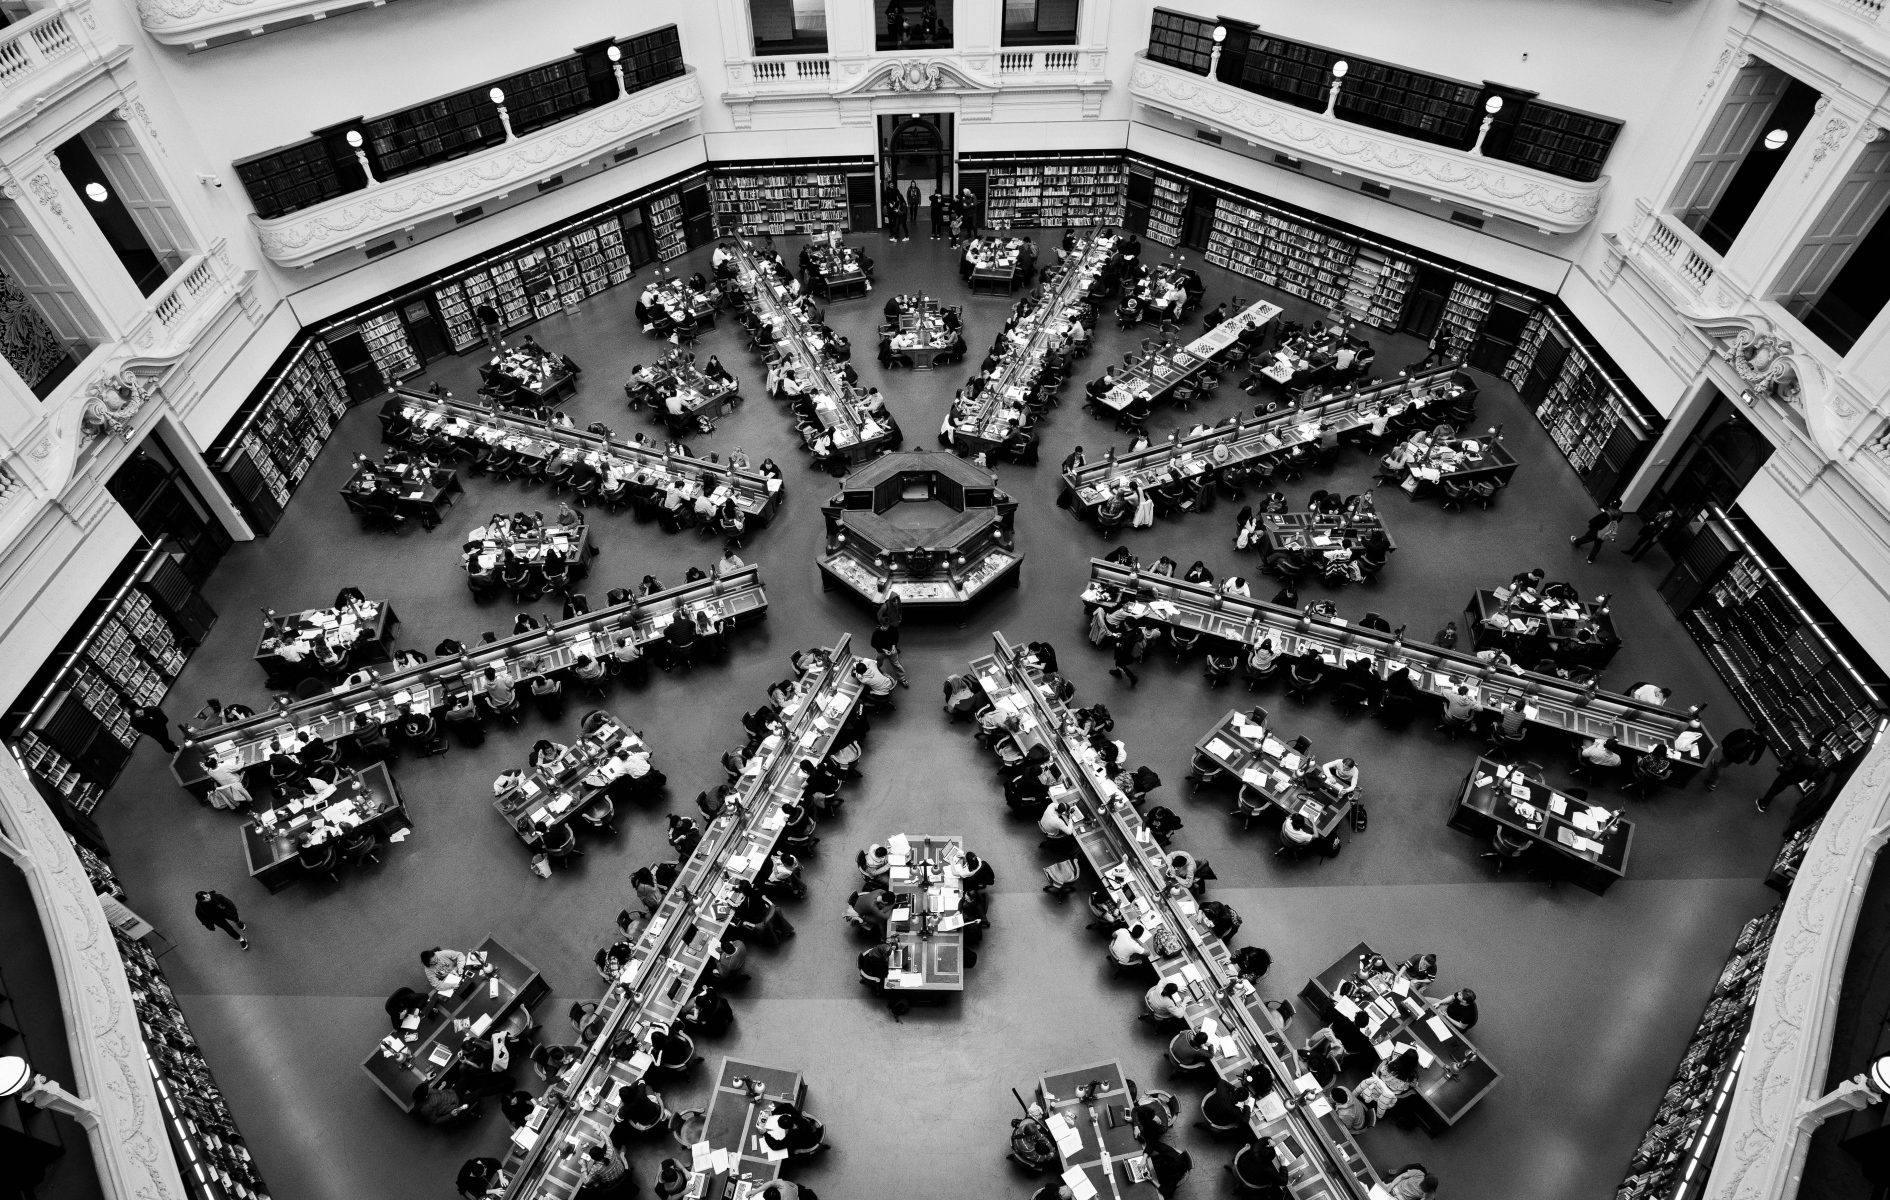 010 Reading Room Melbourne Library,Steve Reeves